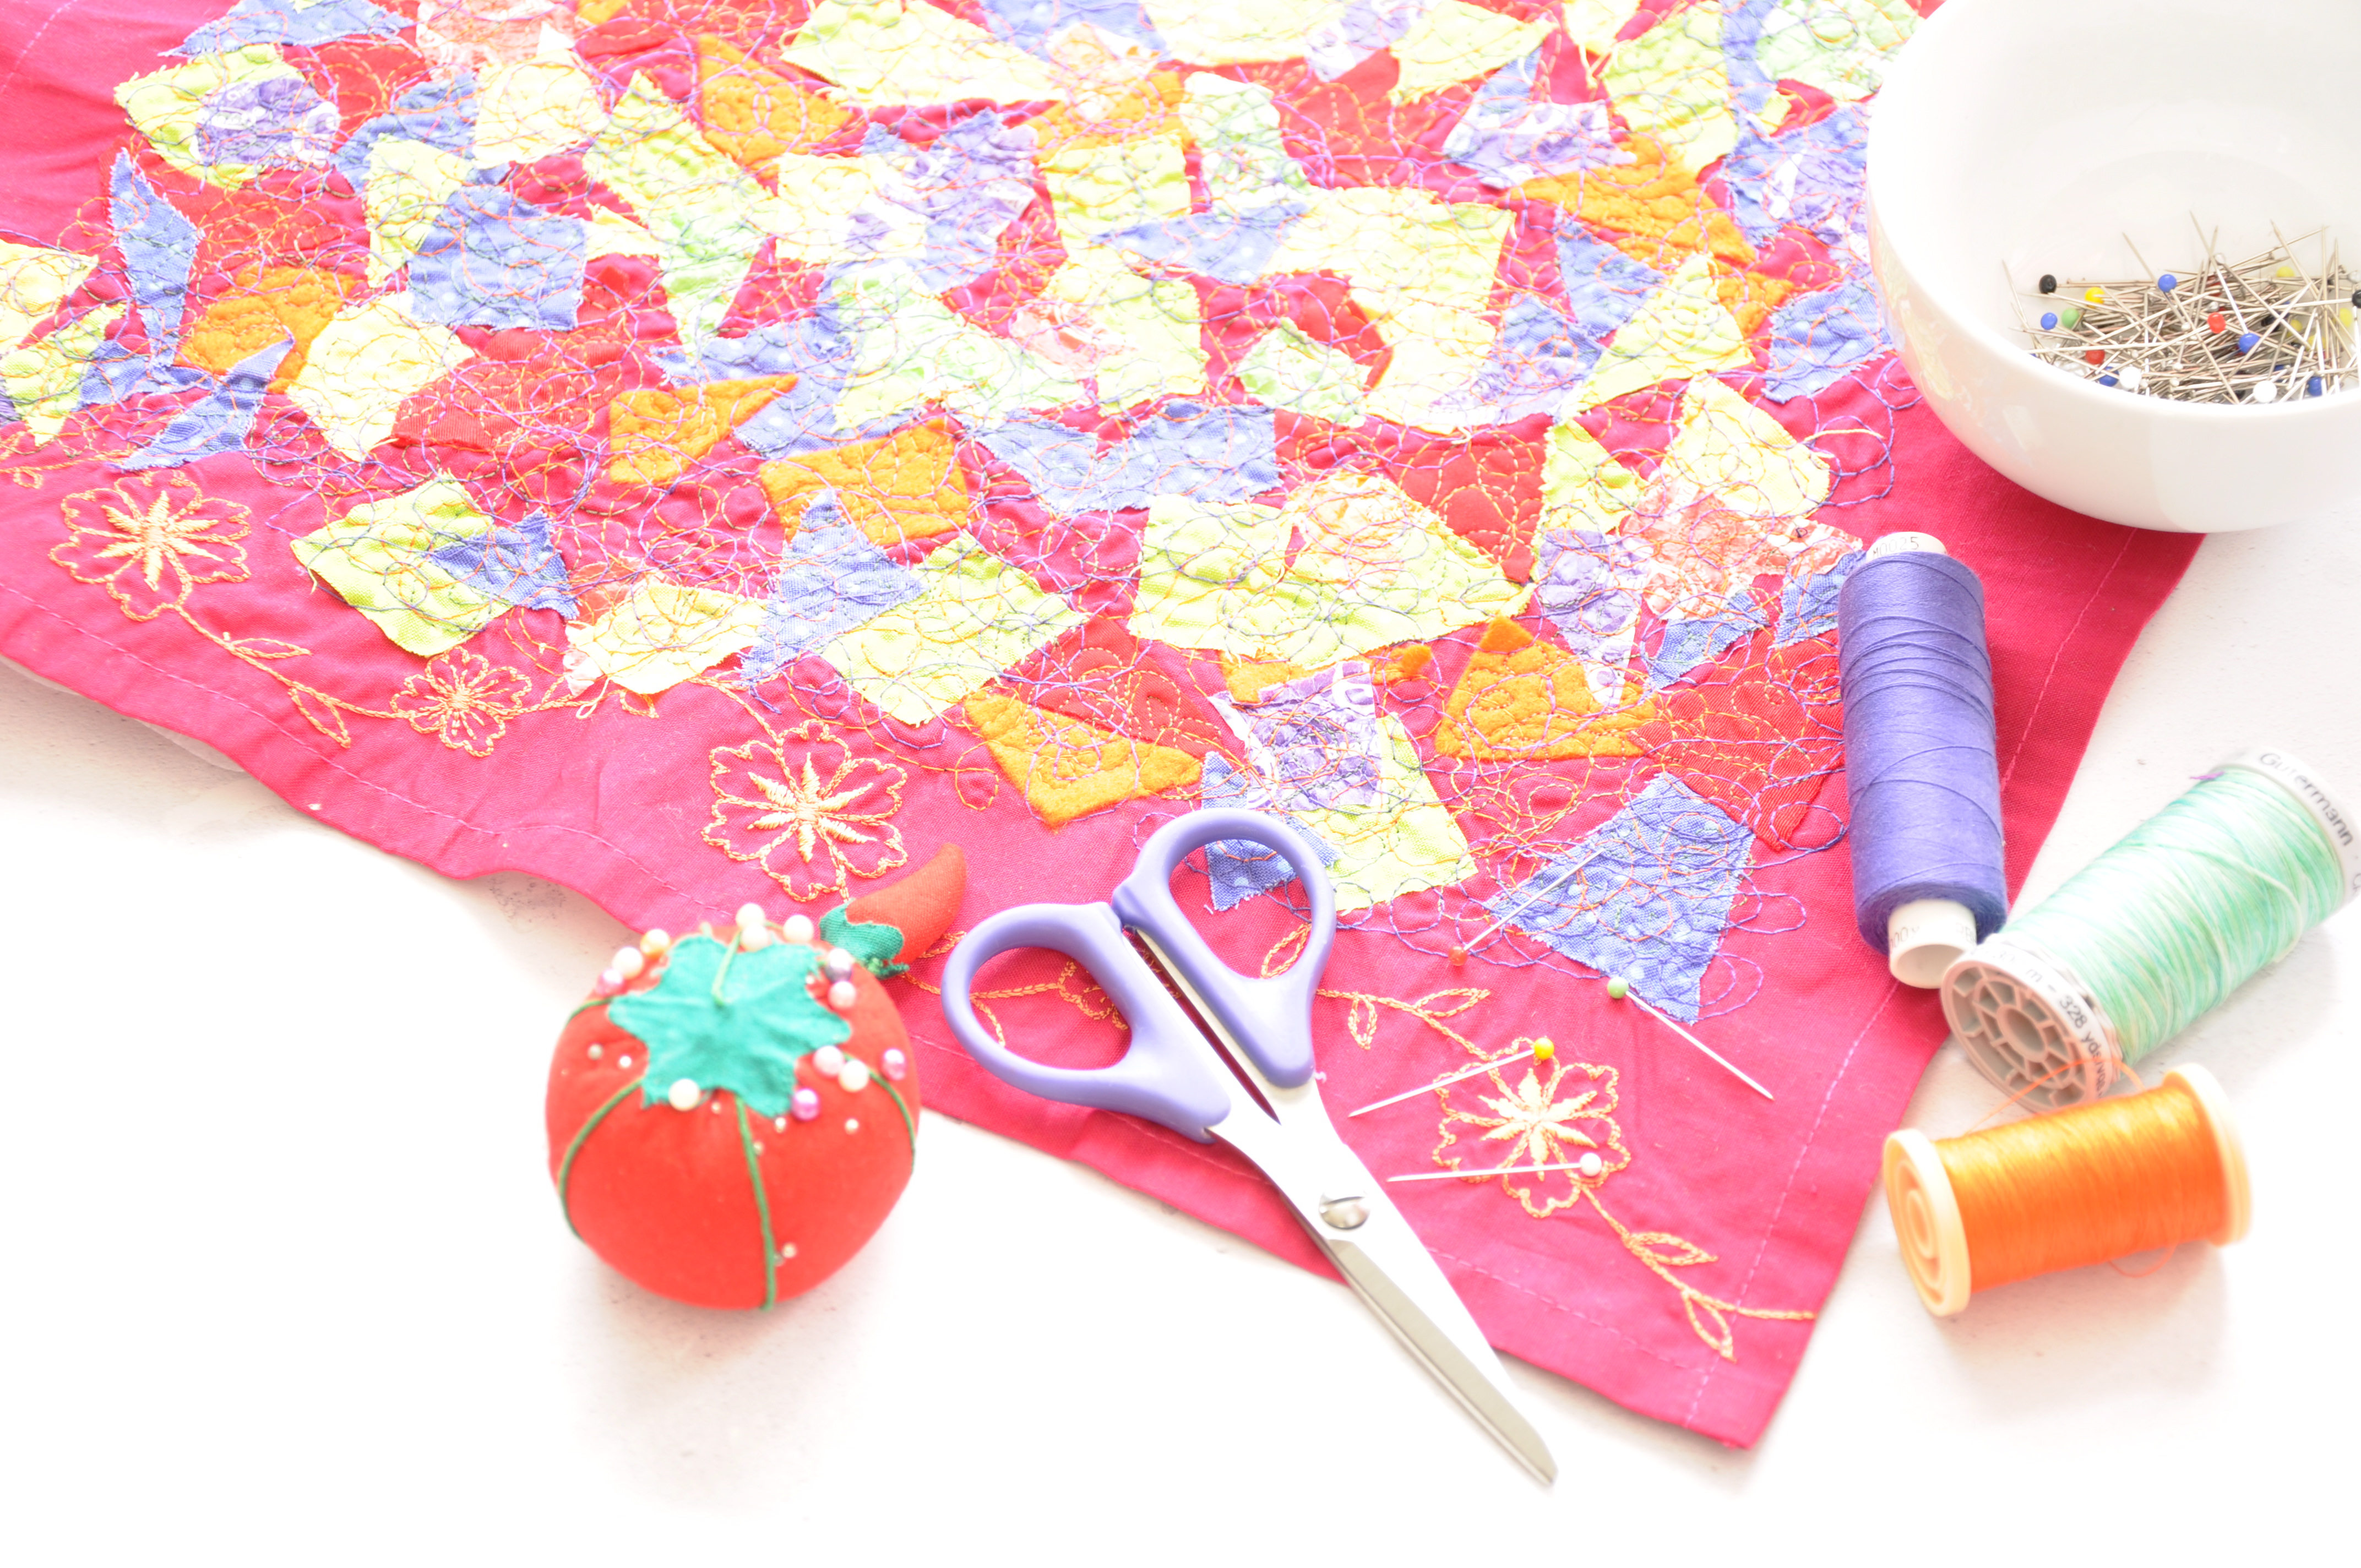 Make your own fabric from scraps